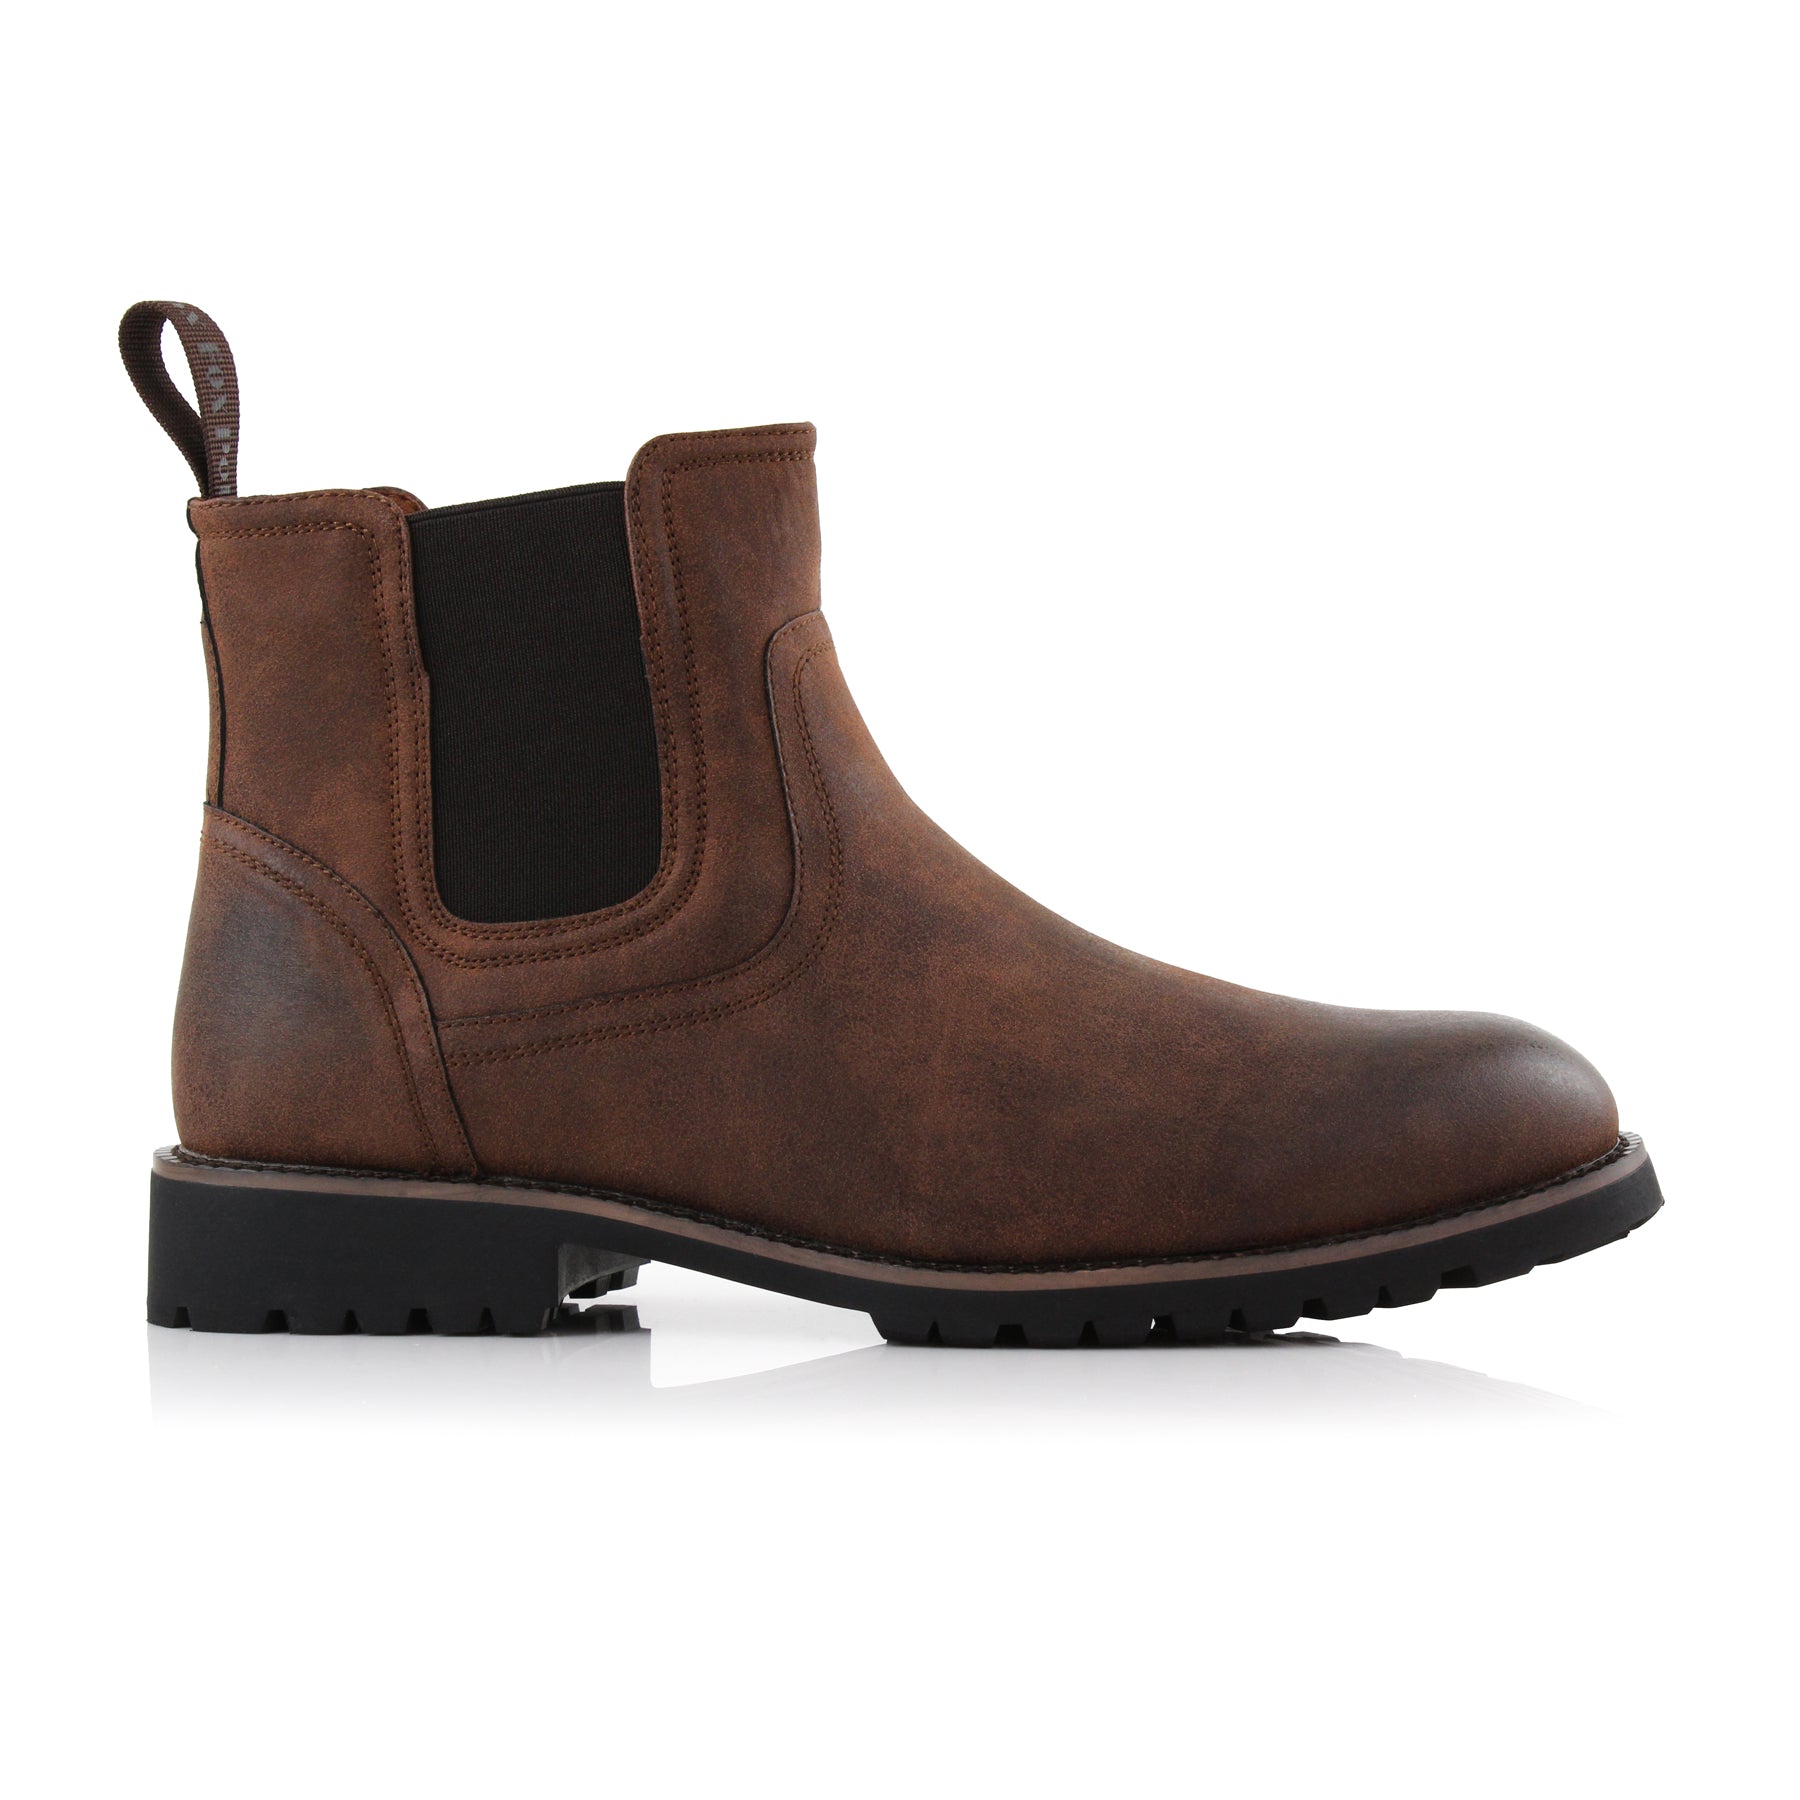 Western Style Chelsea Boots | Duncan by Polar Fox | Conal Footwear | Outer Side Angle View